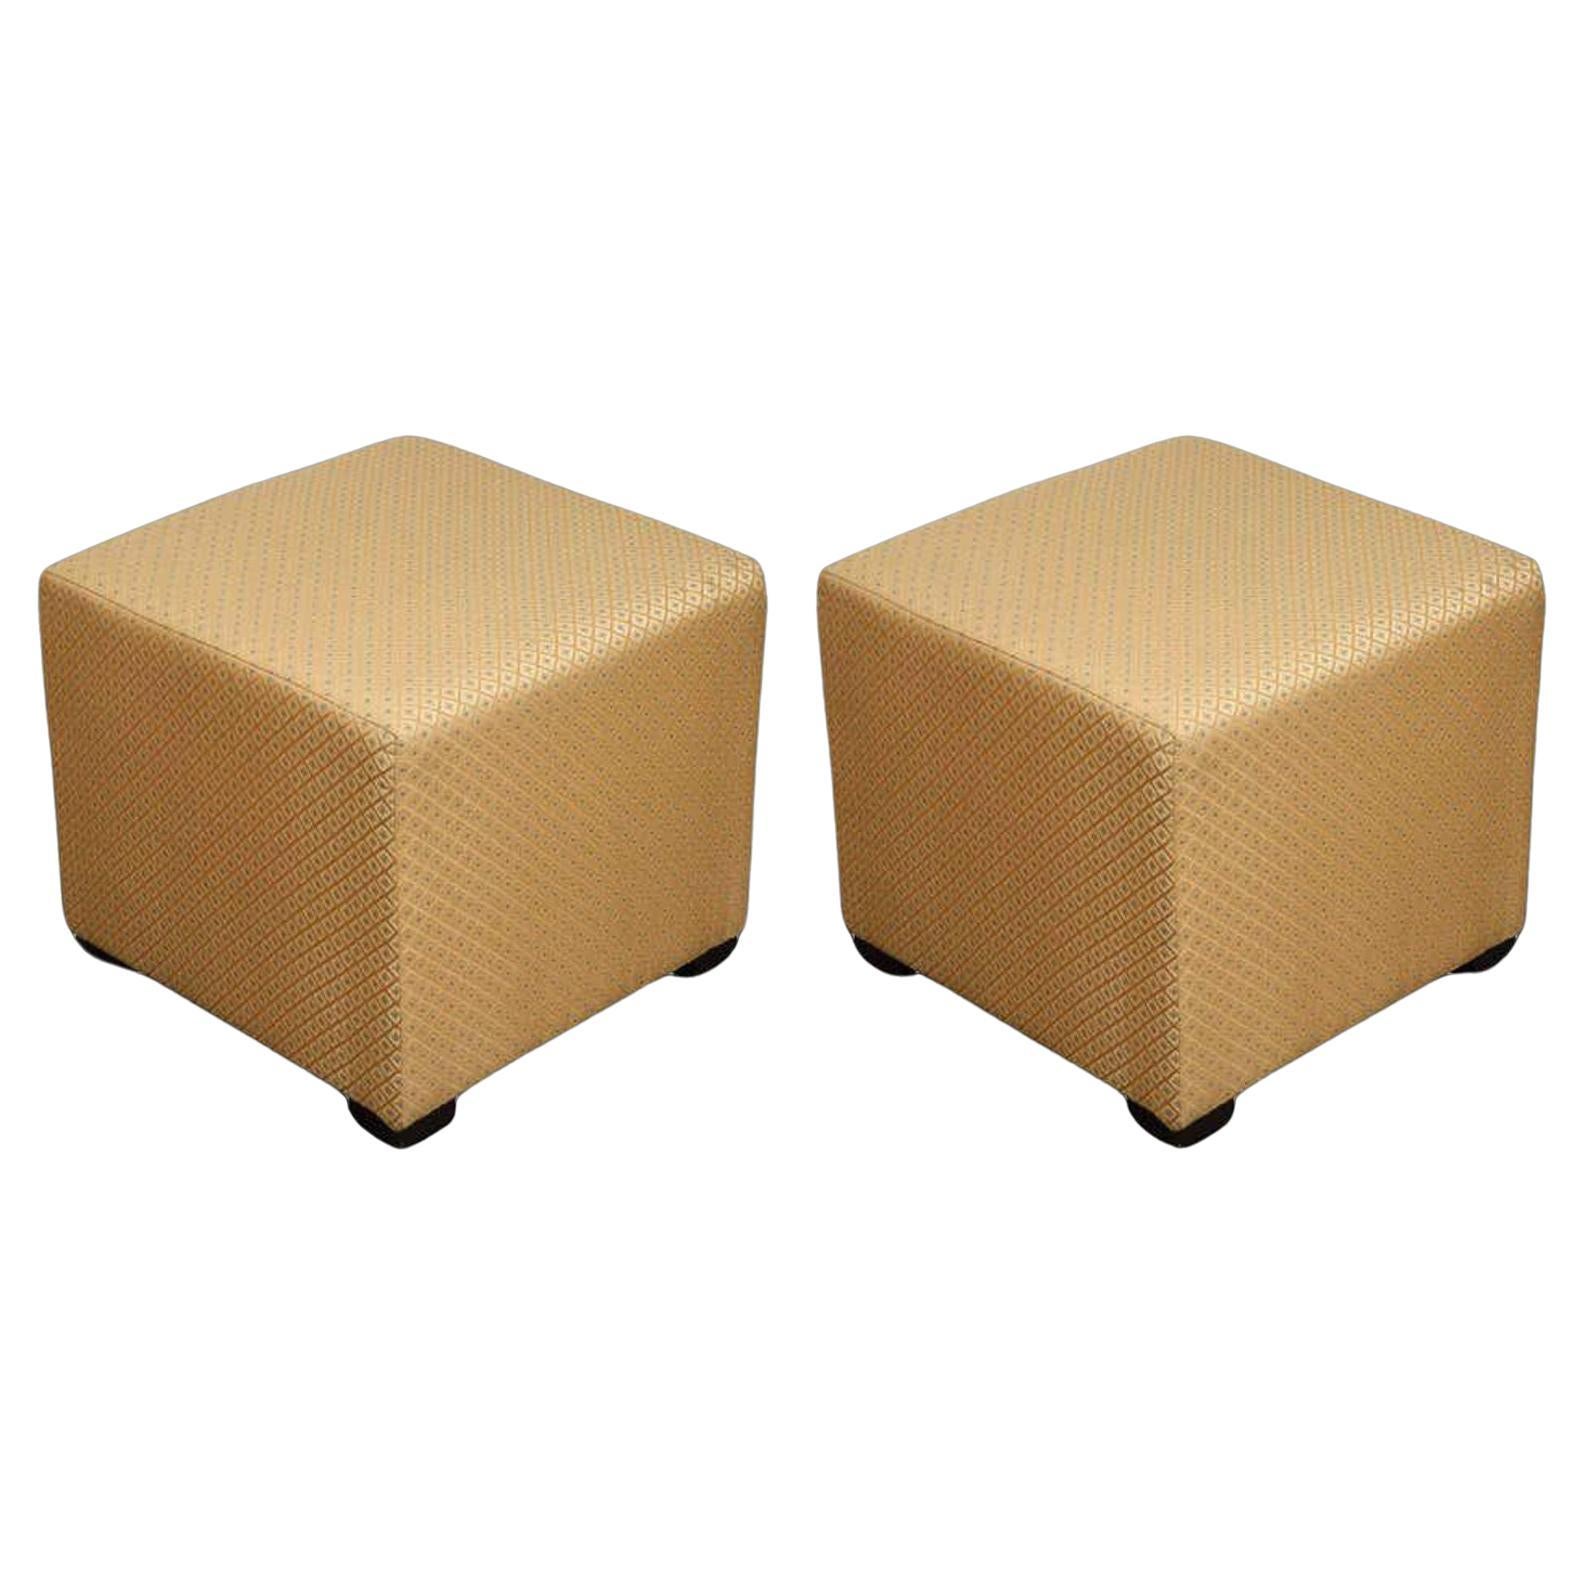 Vintage Cube Upholstered Stools Moroccan Ottomans, Poufs, a Pair